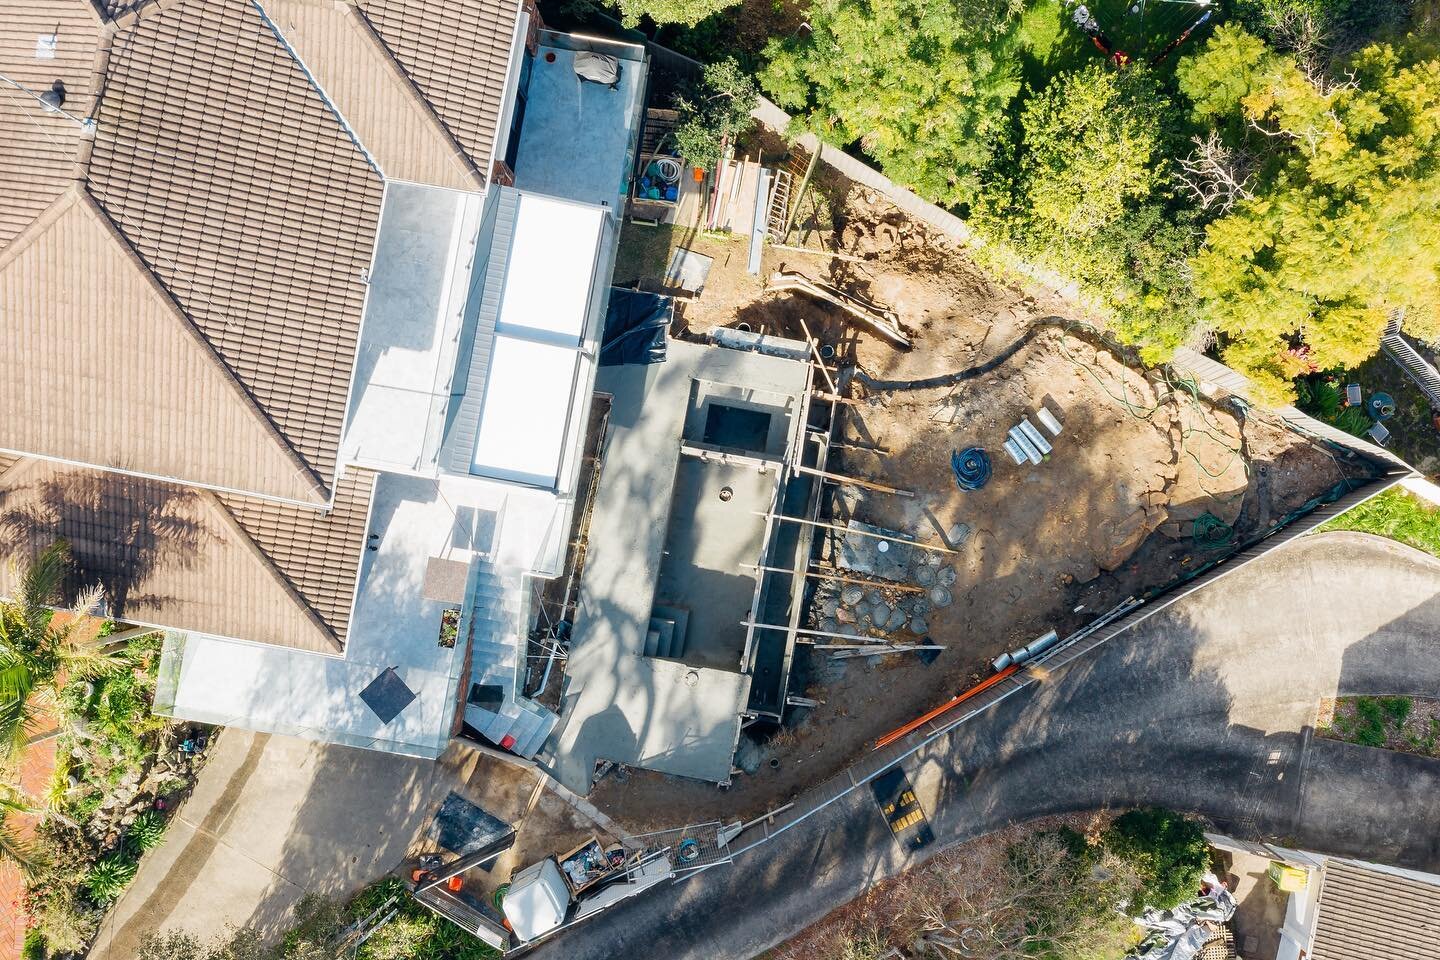 Designed, demoed and constructed by Outside Signatures. Here are some awesome shots of our Yowie Bay project in the concrete pouring stage. Stay tuned for the finishing product! @bcsimaging @a_r_shotcrete #pooldesign #sydneypoolbuilder #outsidesignat